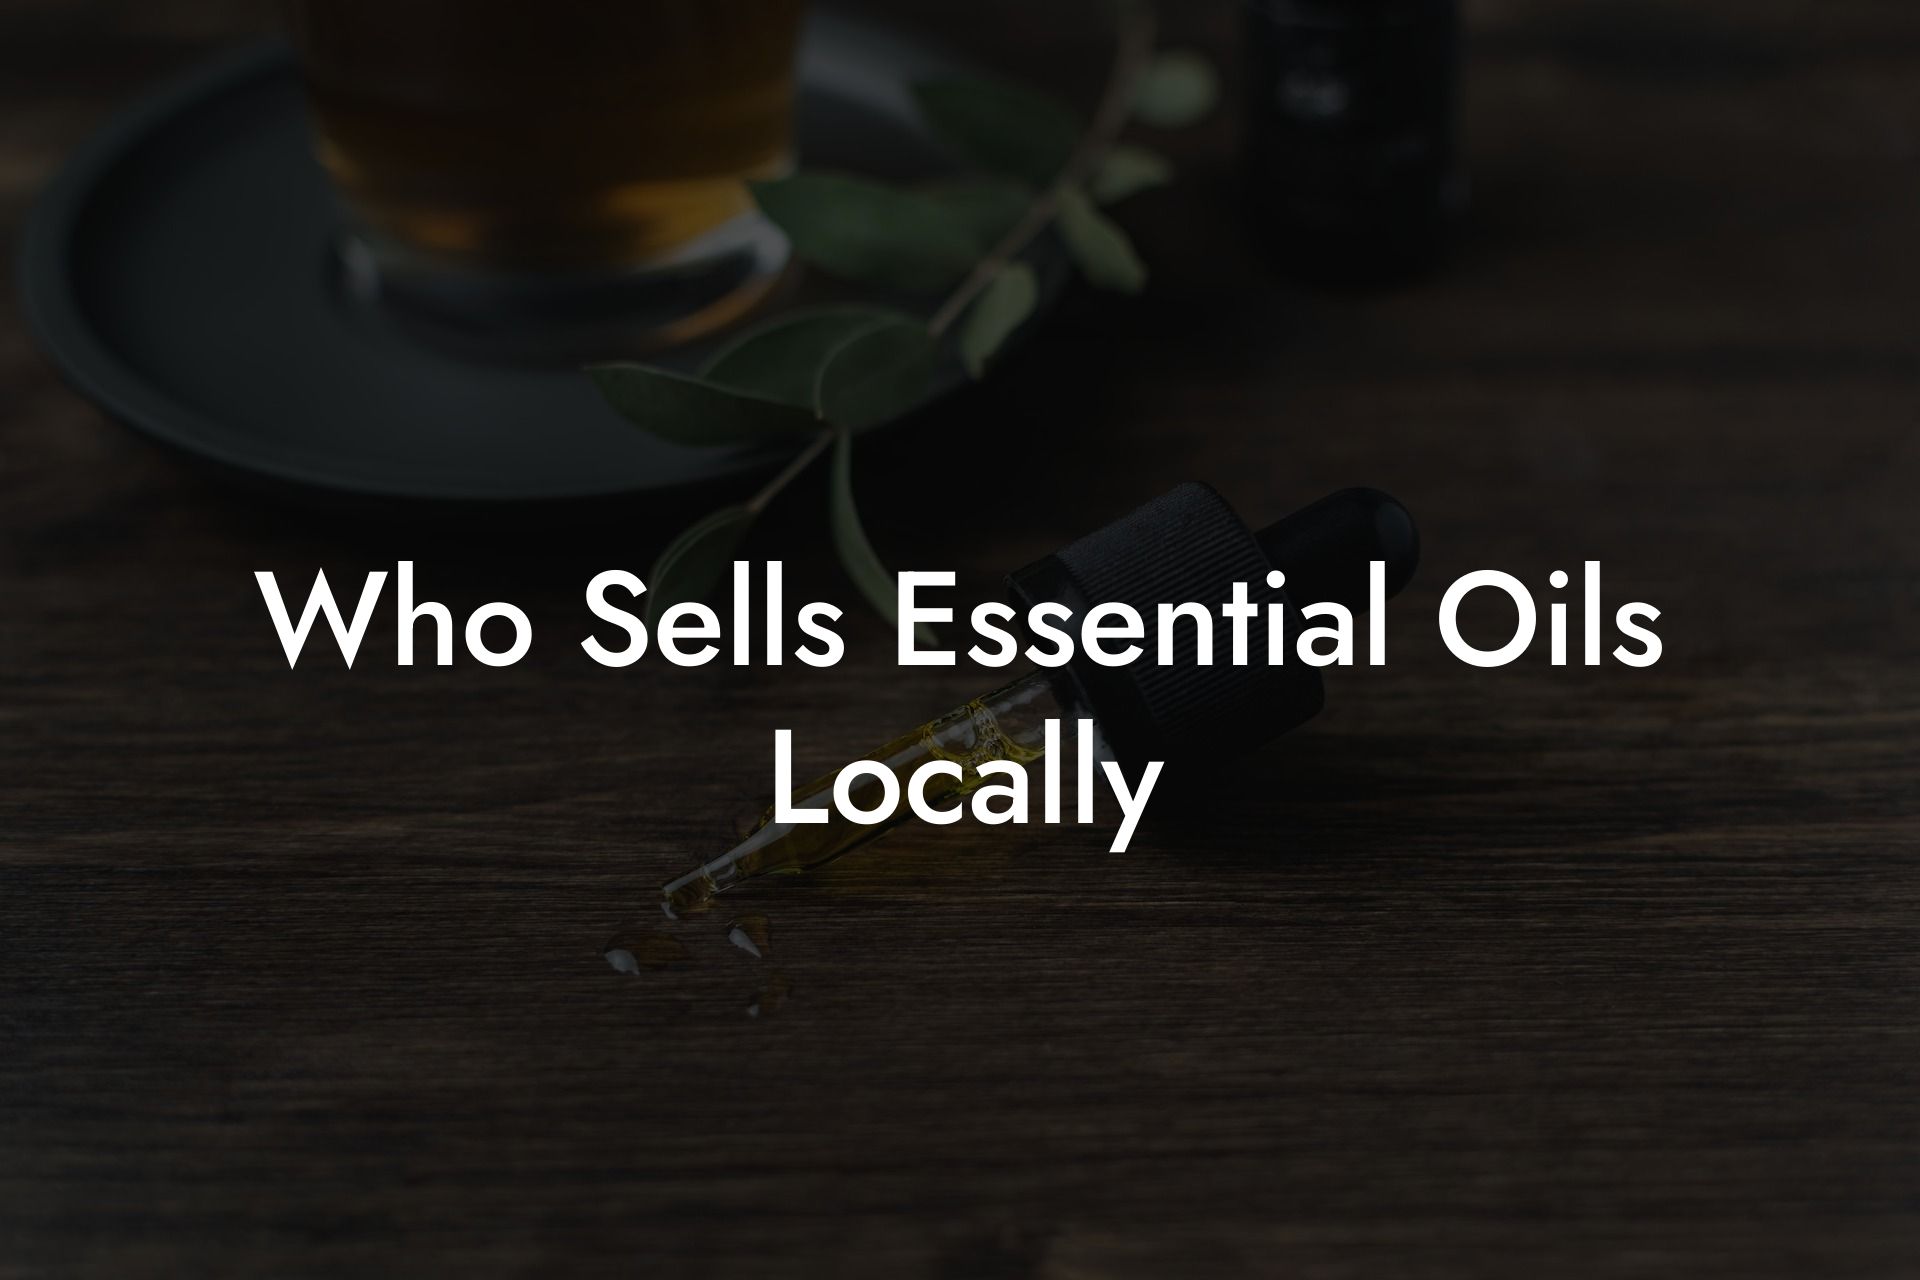 Who Sells Essential Oils Locally